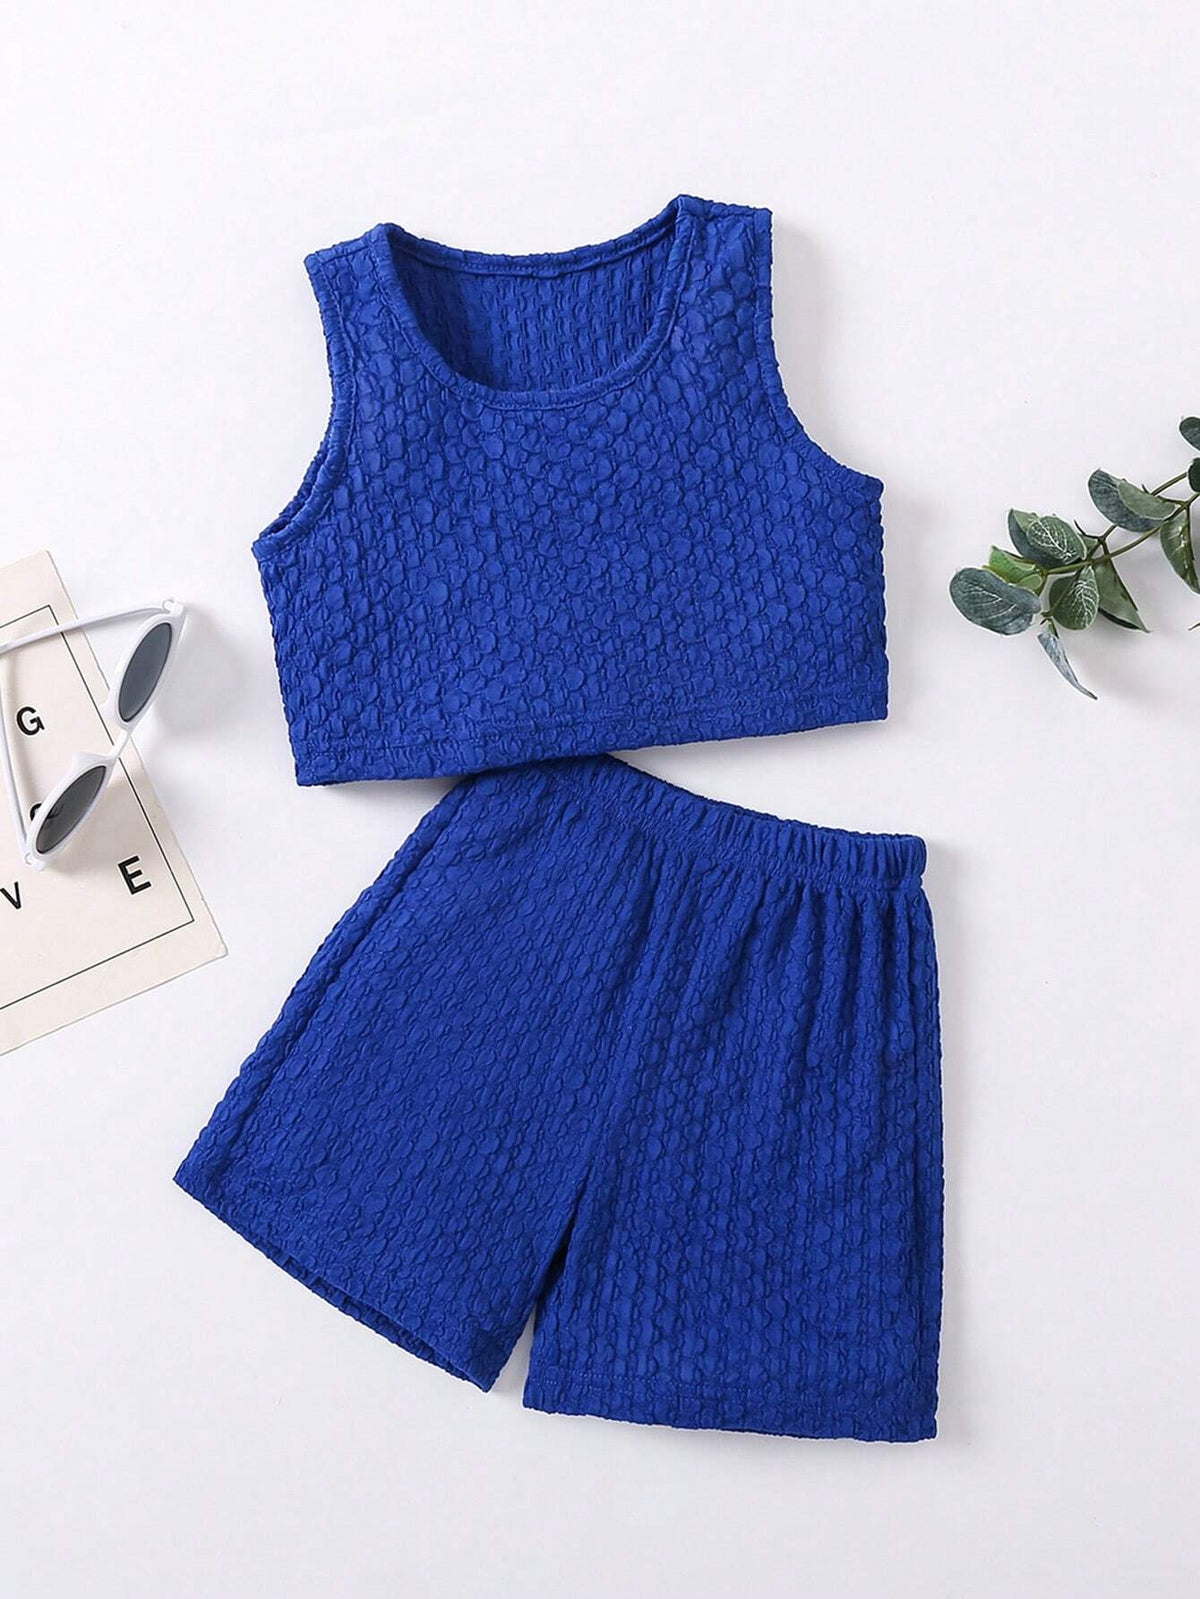 Young Girls' 2pcs/Set Casual/Sporty/Streetstyle Blue Bubble Texture Tank Top & Shorts Outfit For Summer